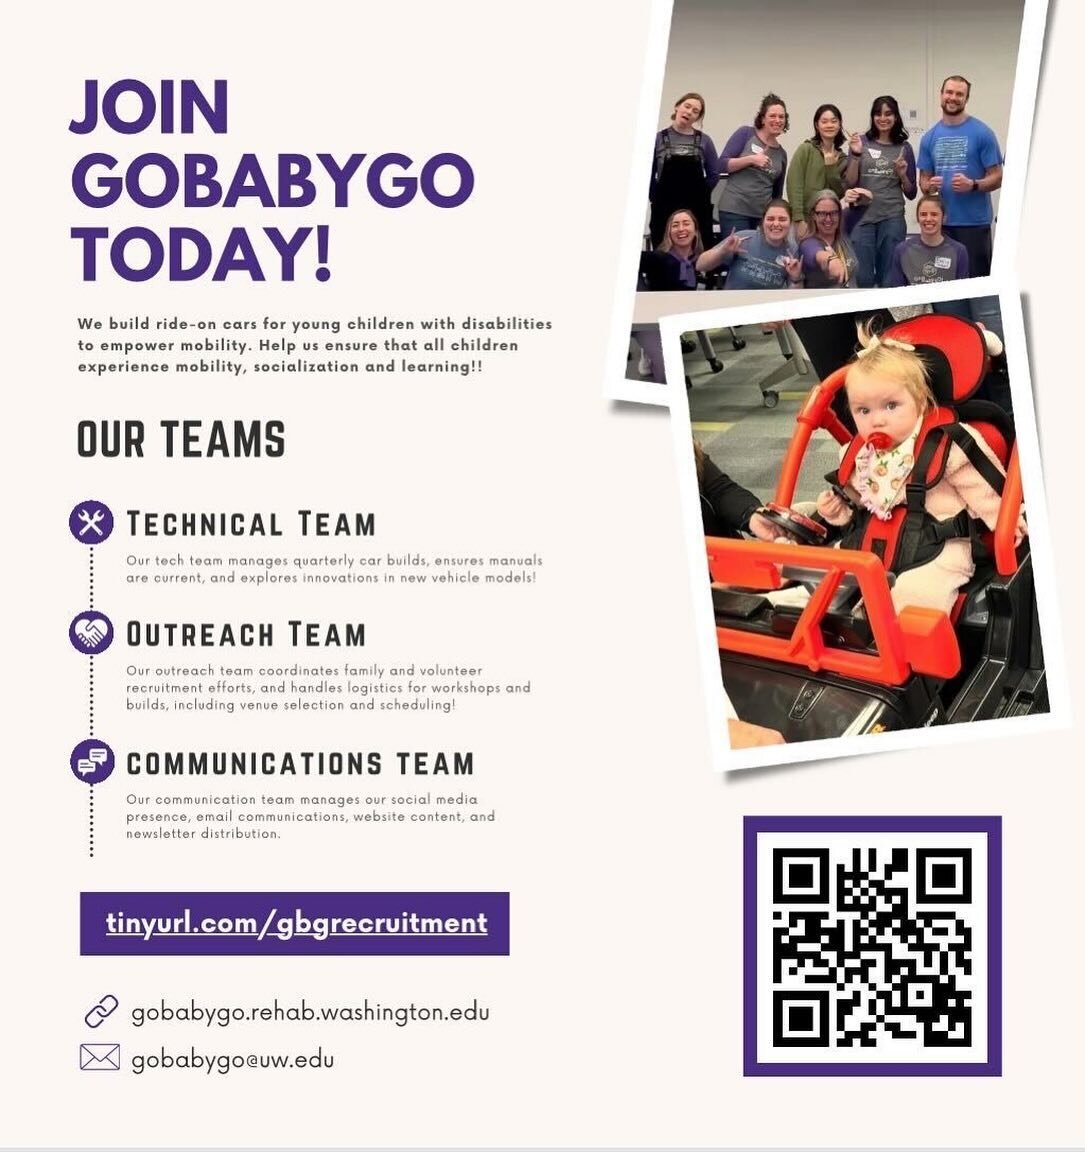 Interested in joining the GoBabyGo team? Leadership applications for GoBabyGo will open on Wednesday 4/3. If you&rsquo;re interested in having a more in-depth role in GoBabyGo, fill out our Google Form in bio, or scan our QR code. Applications close 